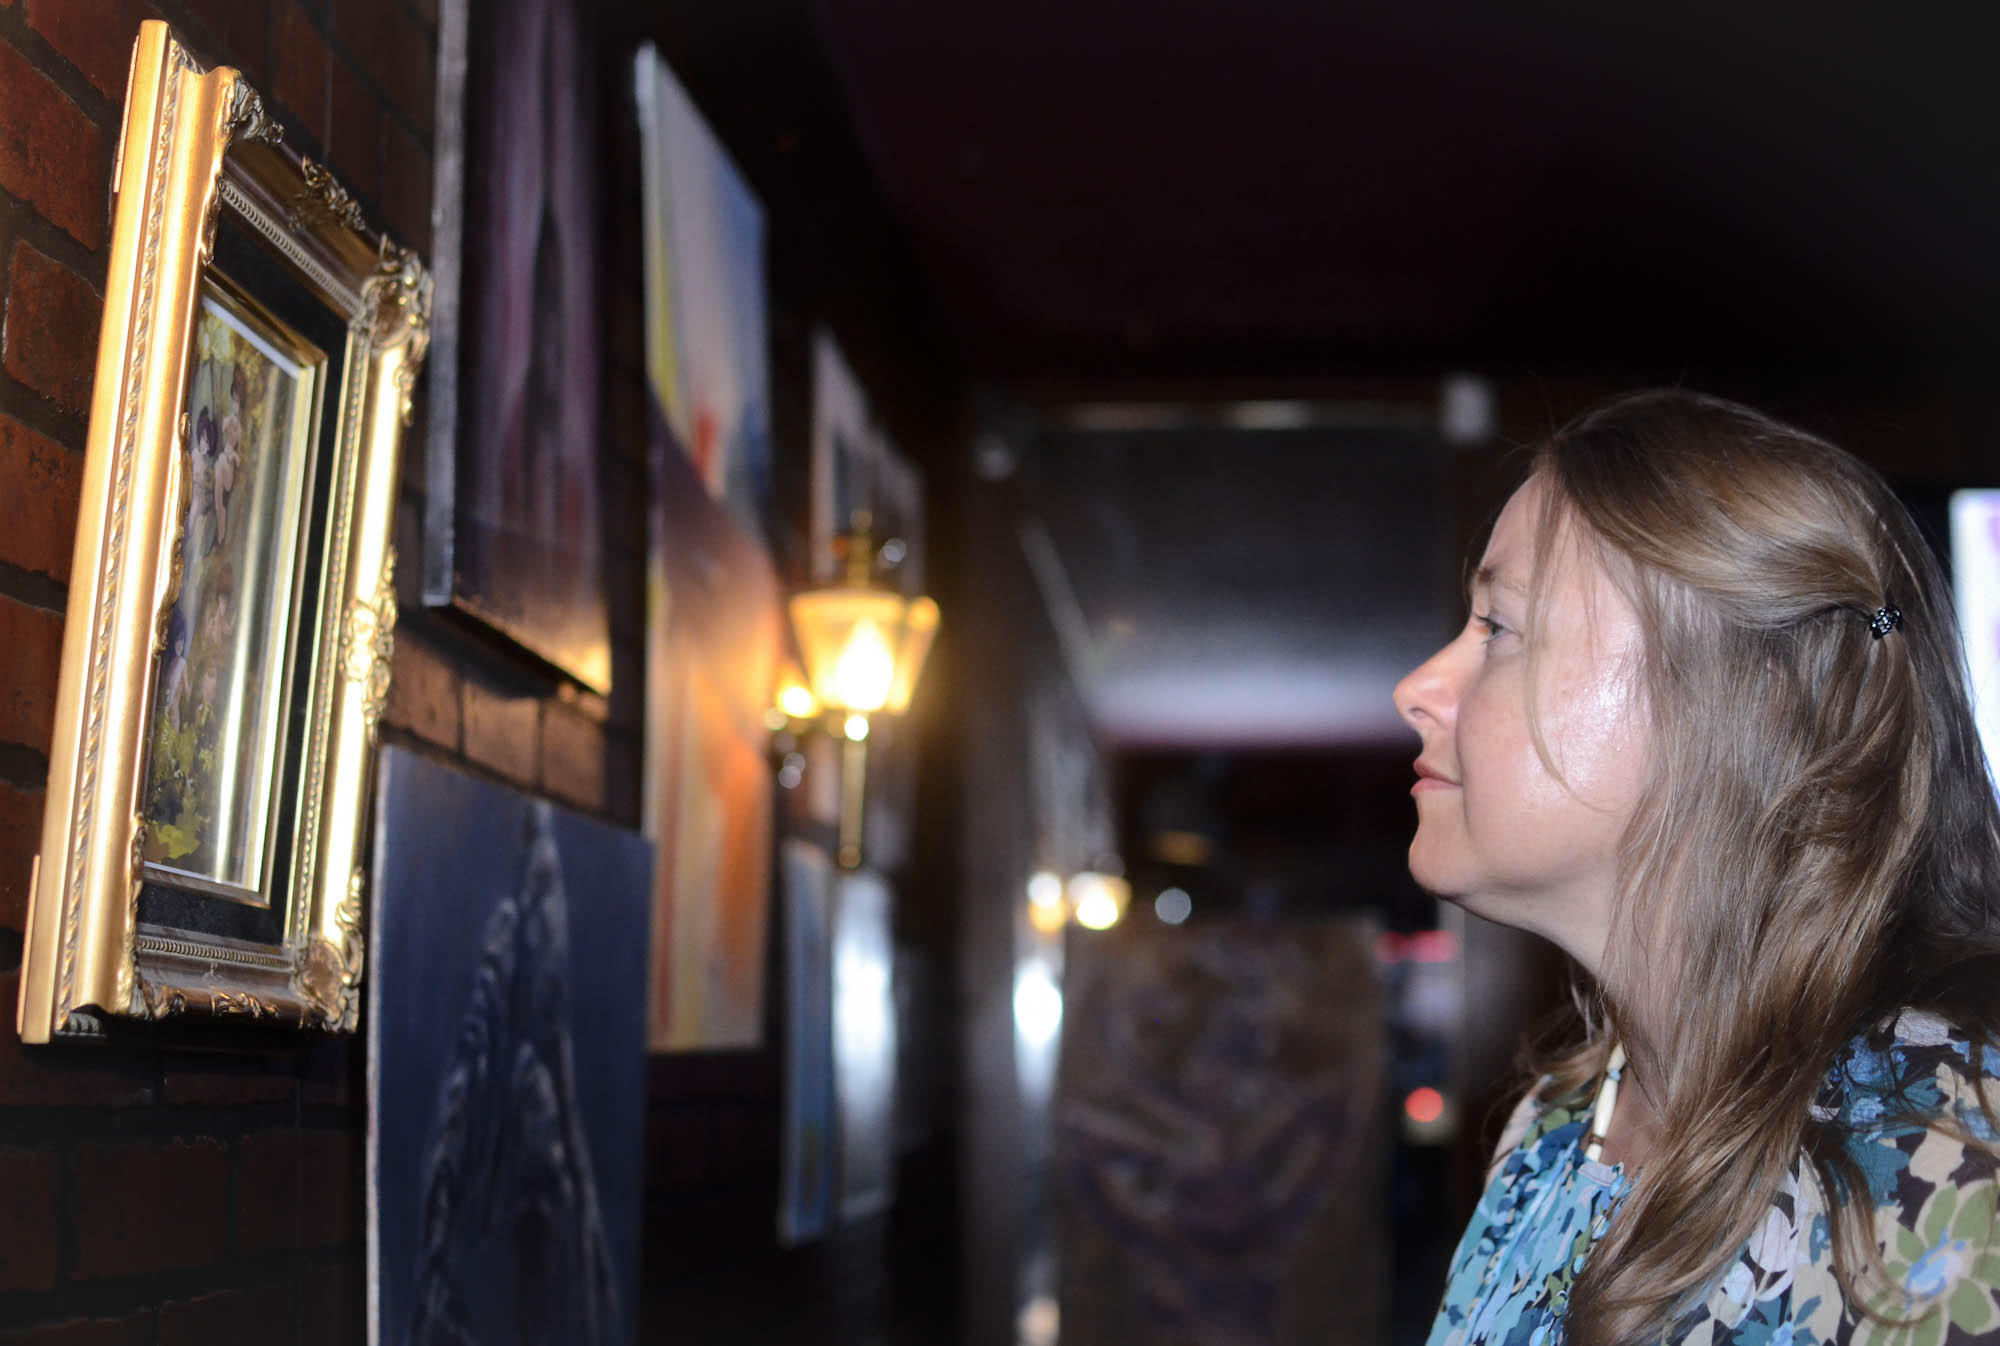 Local bar The Bunker hosts “Ode to Nature” student-art show